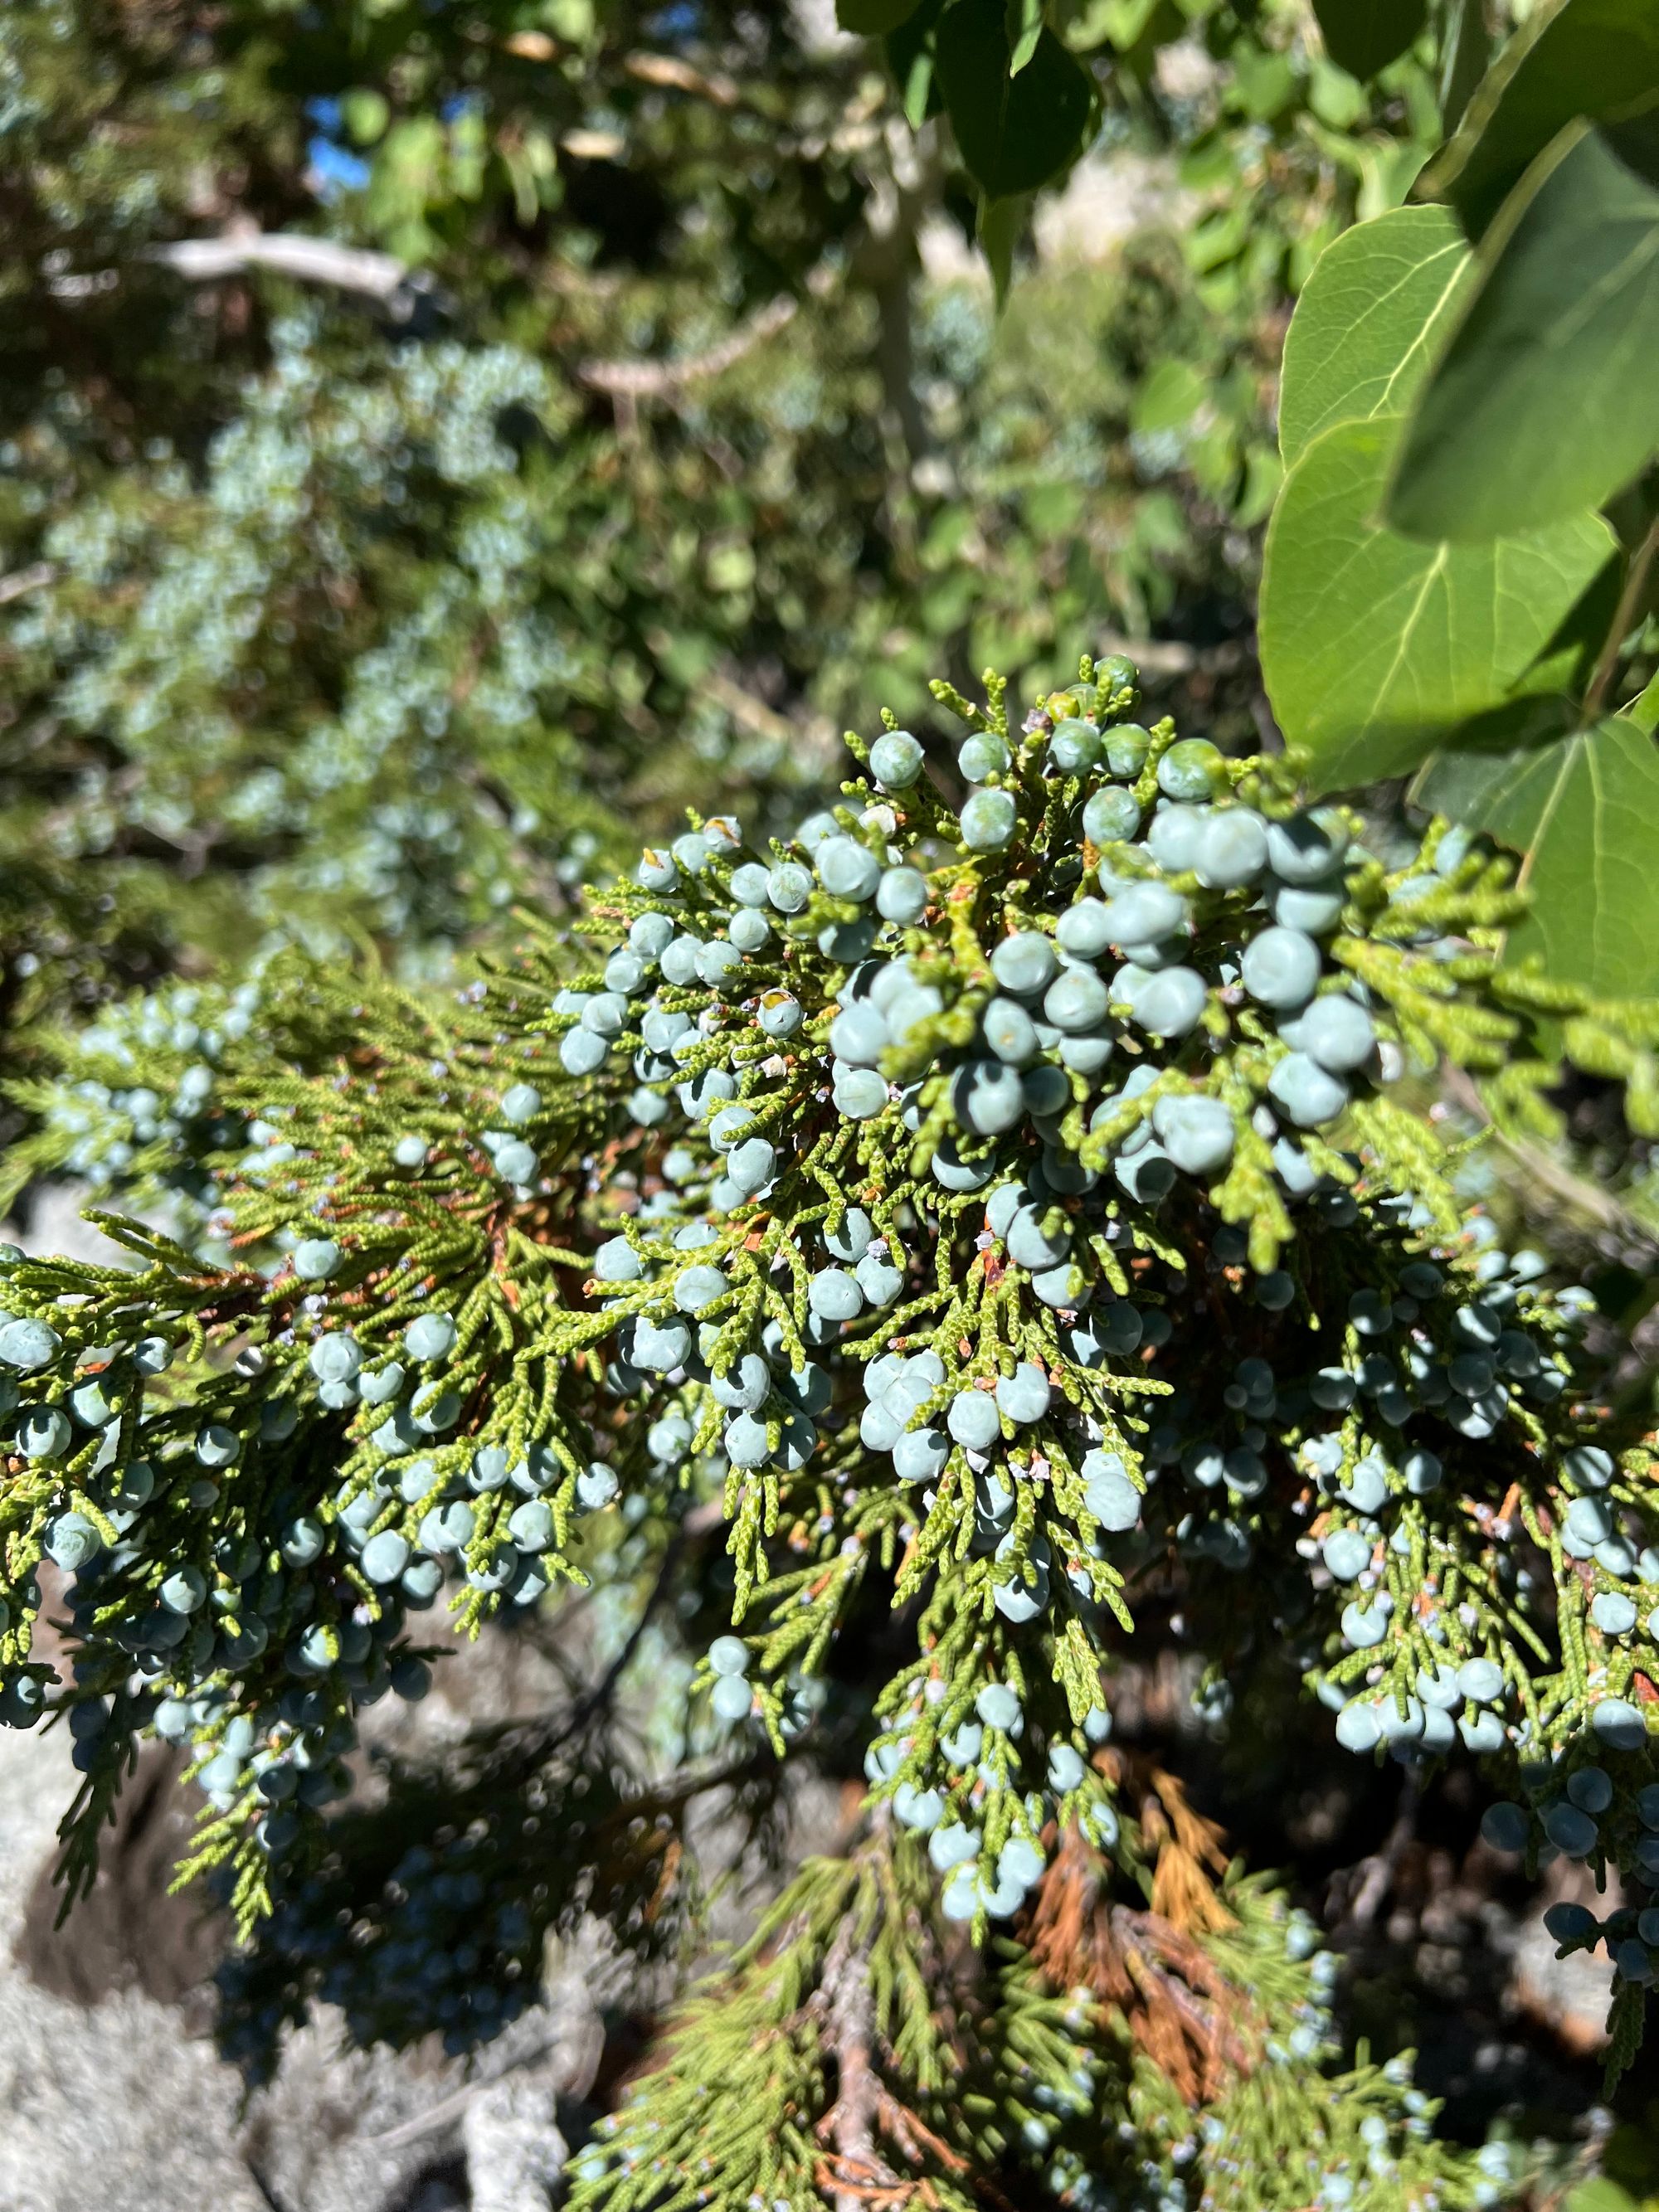 A juniper branch with tens of berries.